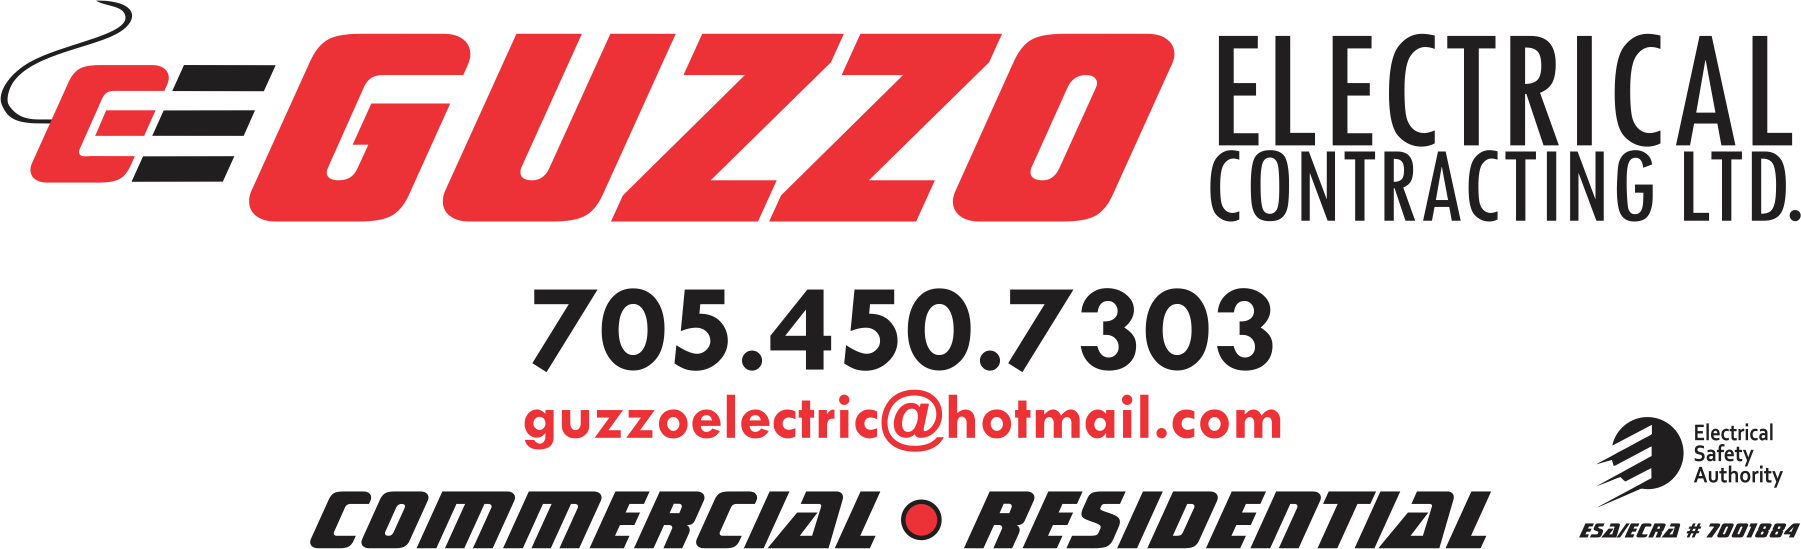 Guzzo Electrical Contracting Ltd. 